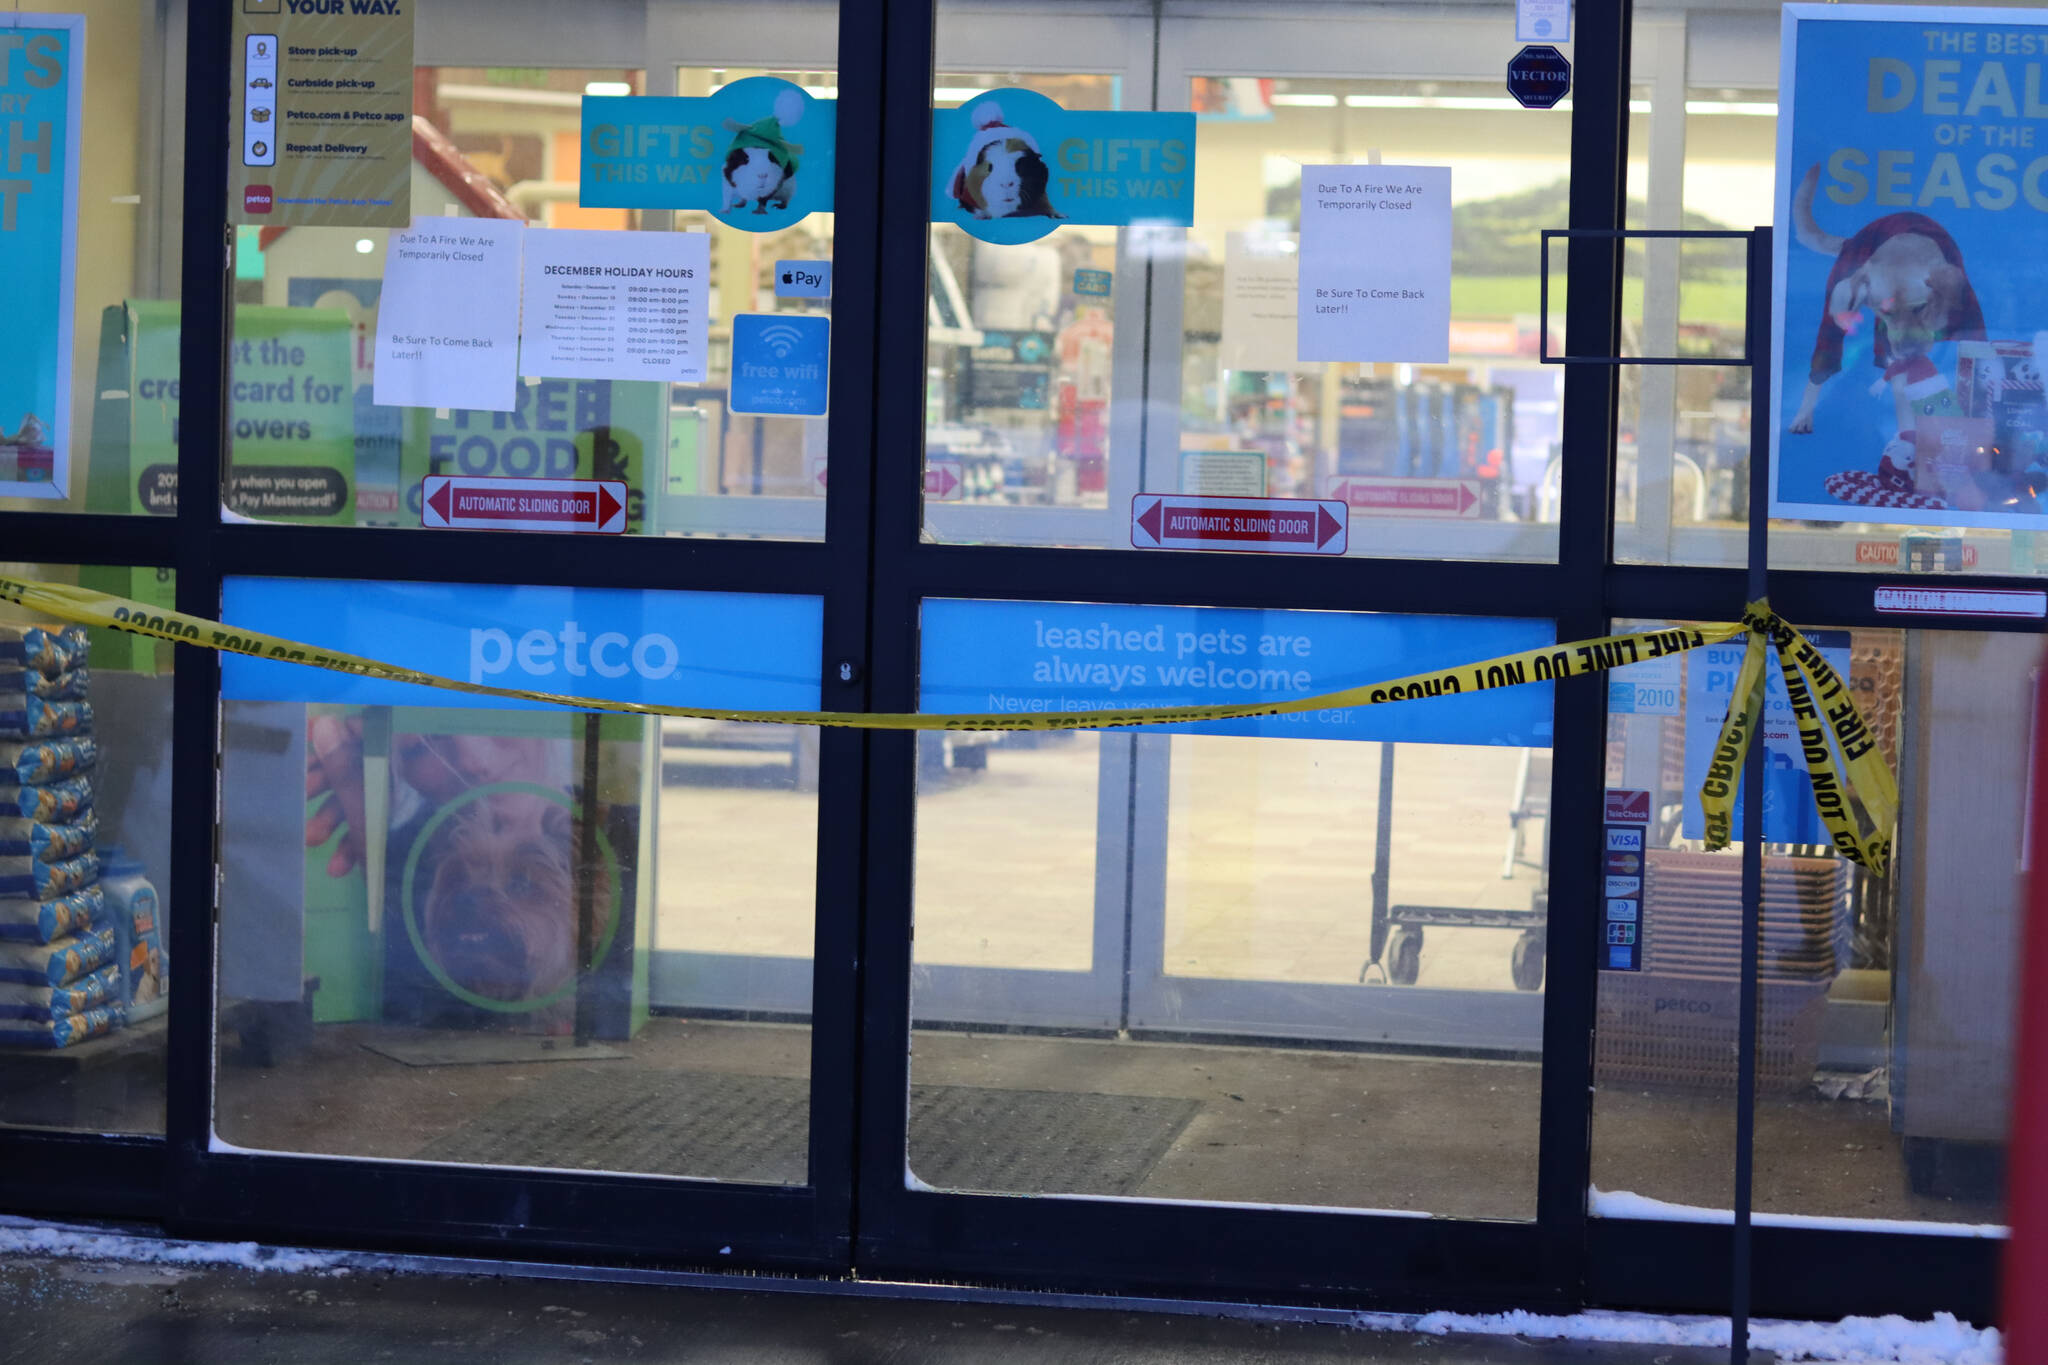 Petco had a small fire in a ceiling heating unit on Monday, Dec. 27, 2021, briefly closing the store, said a Capital City Fire/Rescue officer in a phone interview. (Ben Hohenstatt / Juneau Empire)